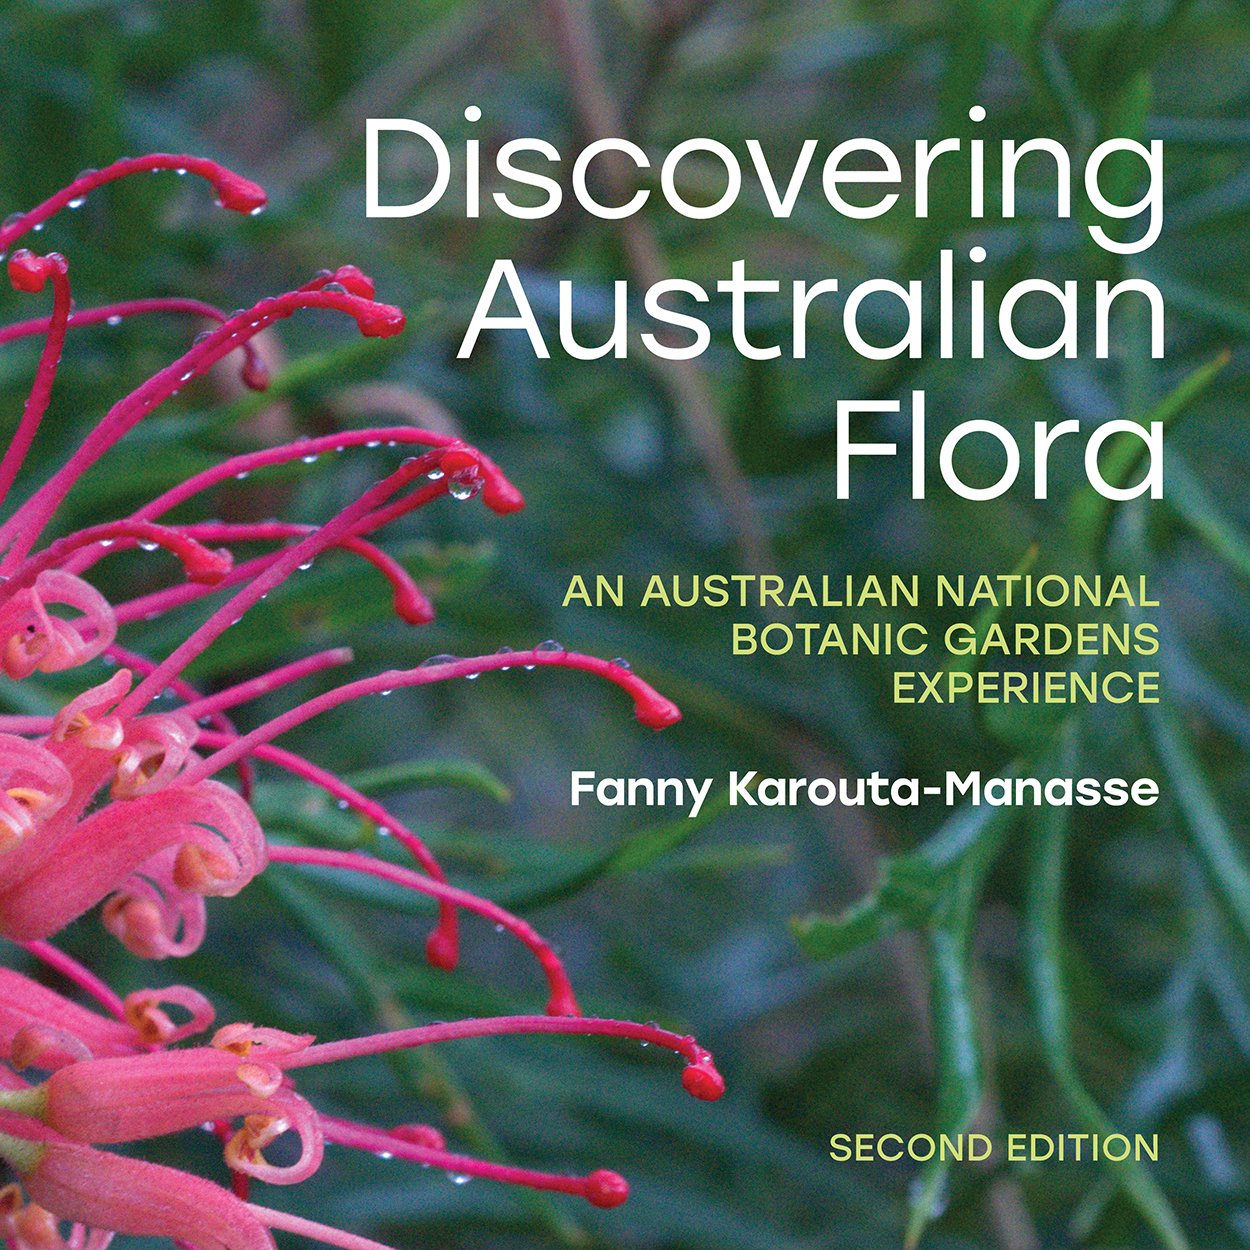 Cover of 'Discovering Australian Flora', featuring a close-up photo of a bright pink native flower against lush dark green foliage.